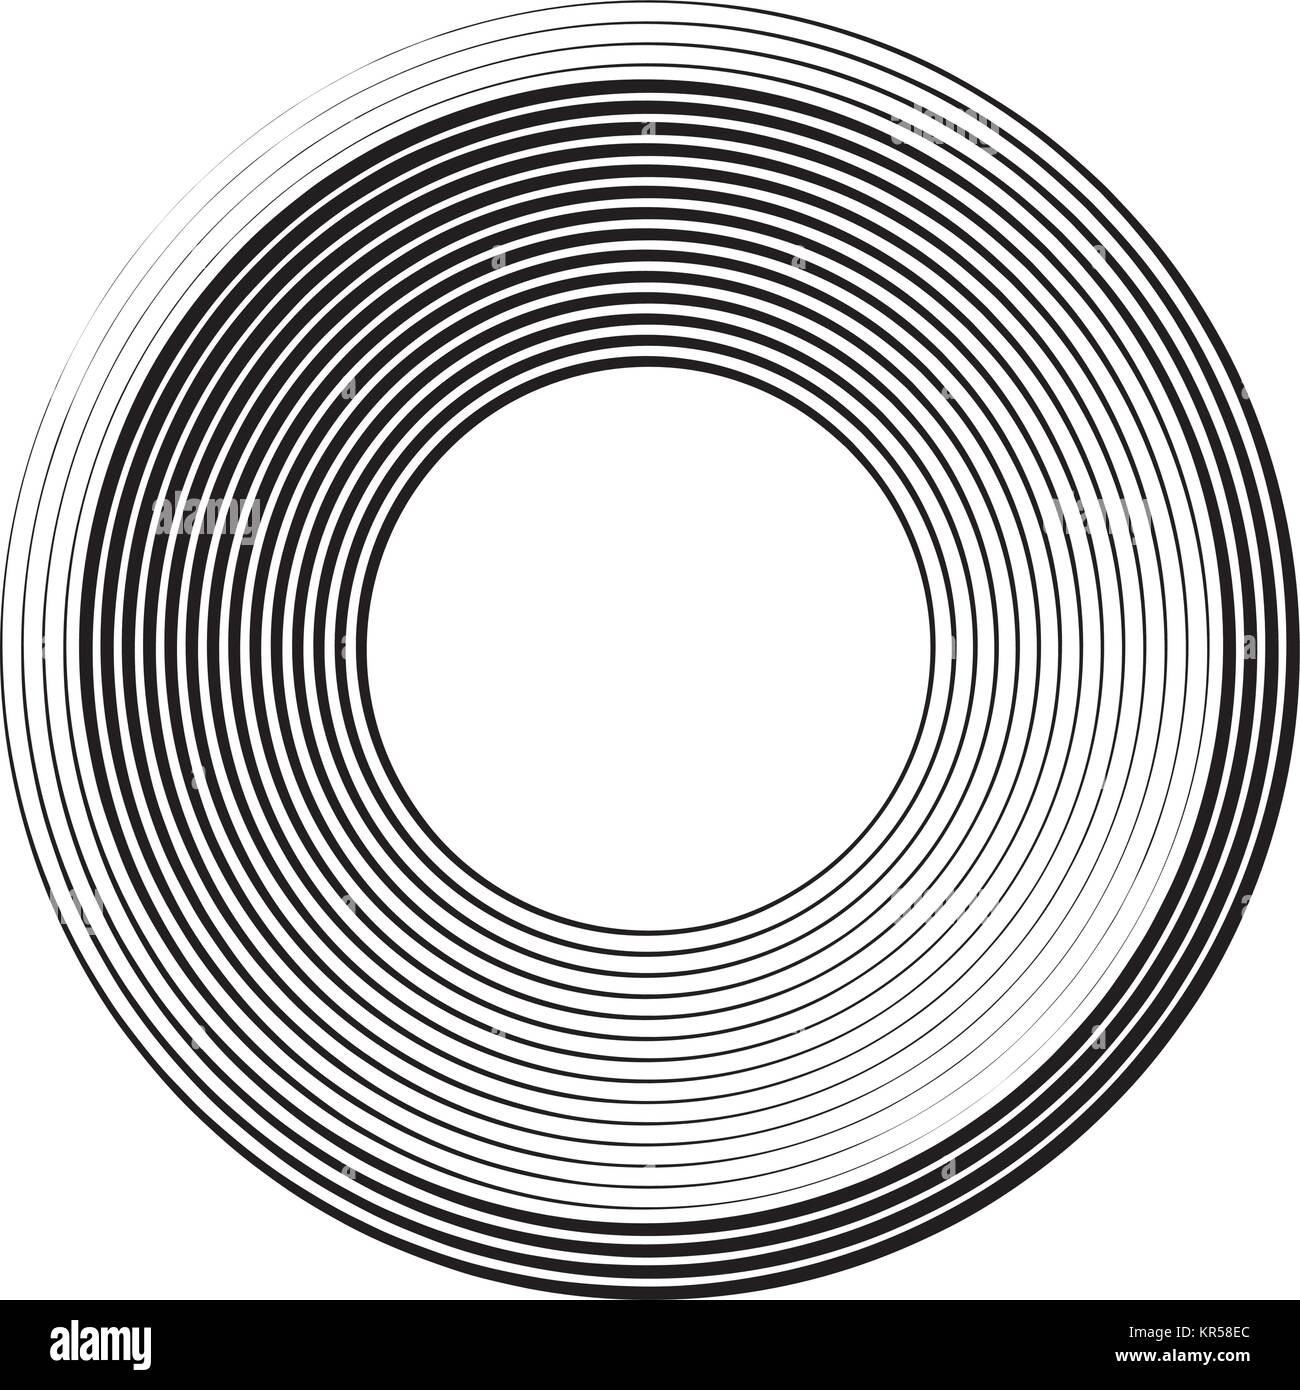 round shape from concentric halftone circles Stock Vector